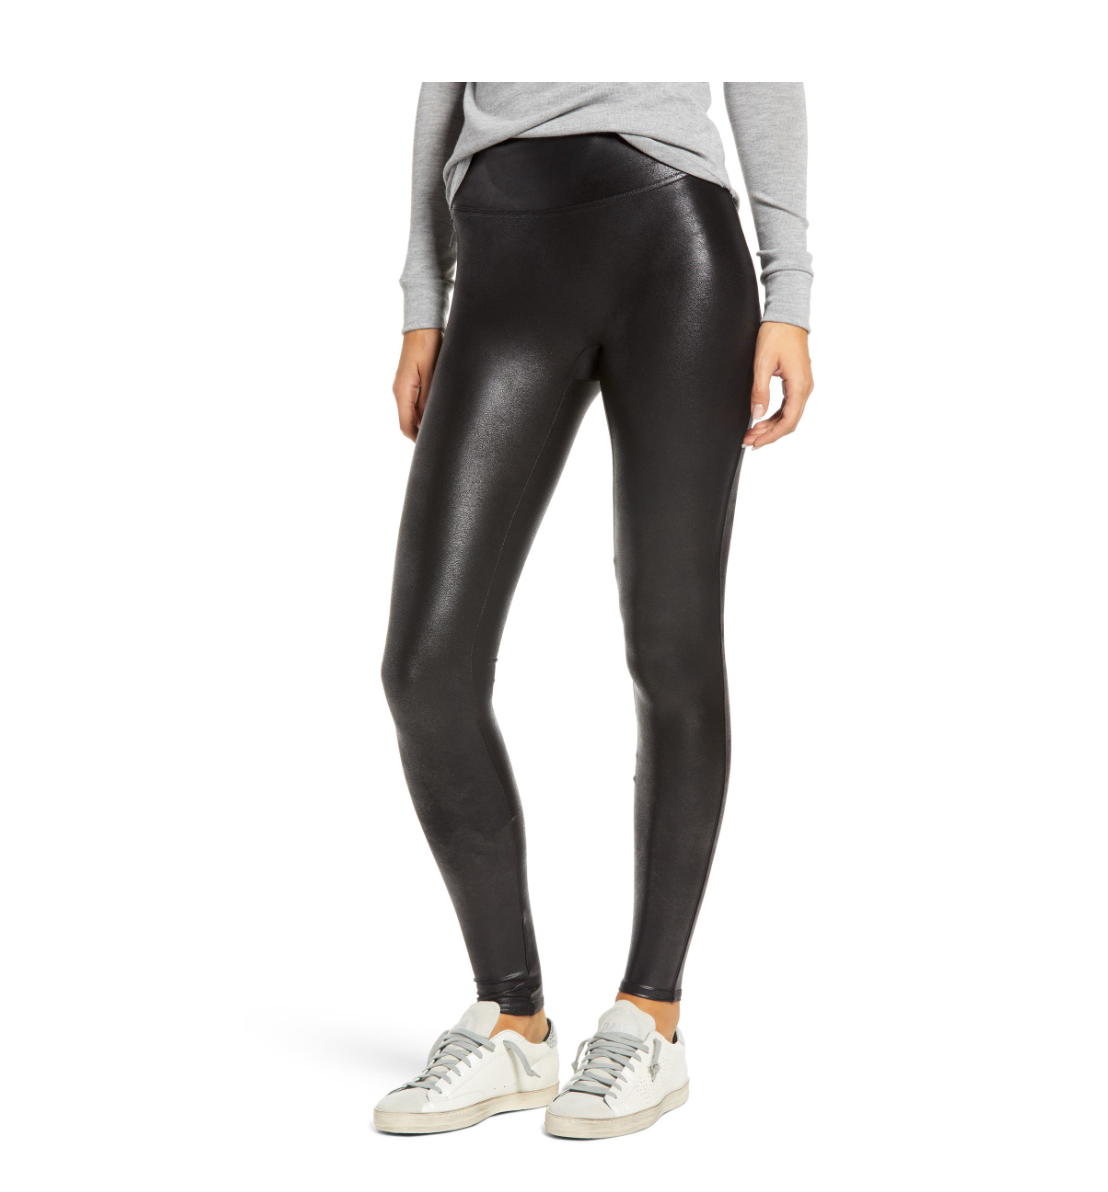 Spanx Faux Leather Legging My Site, 48% OFF